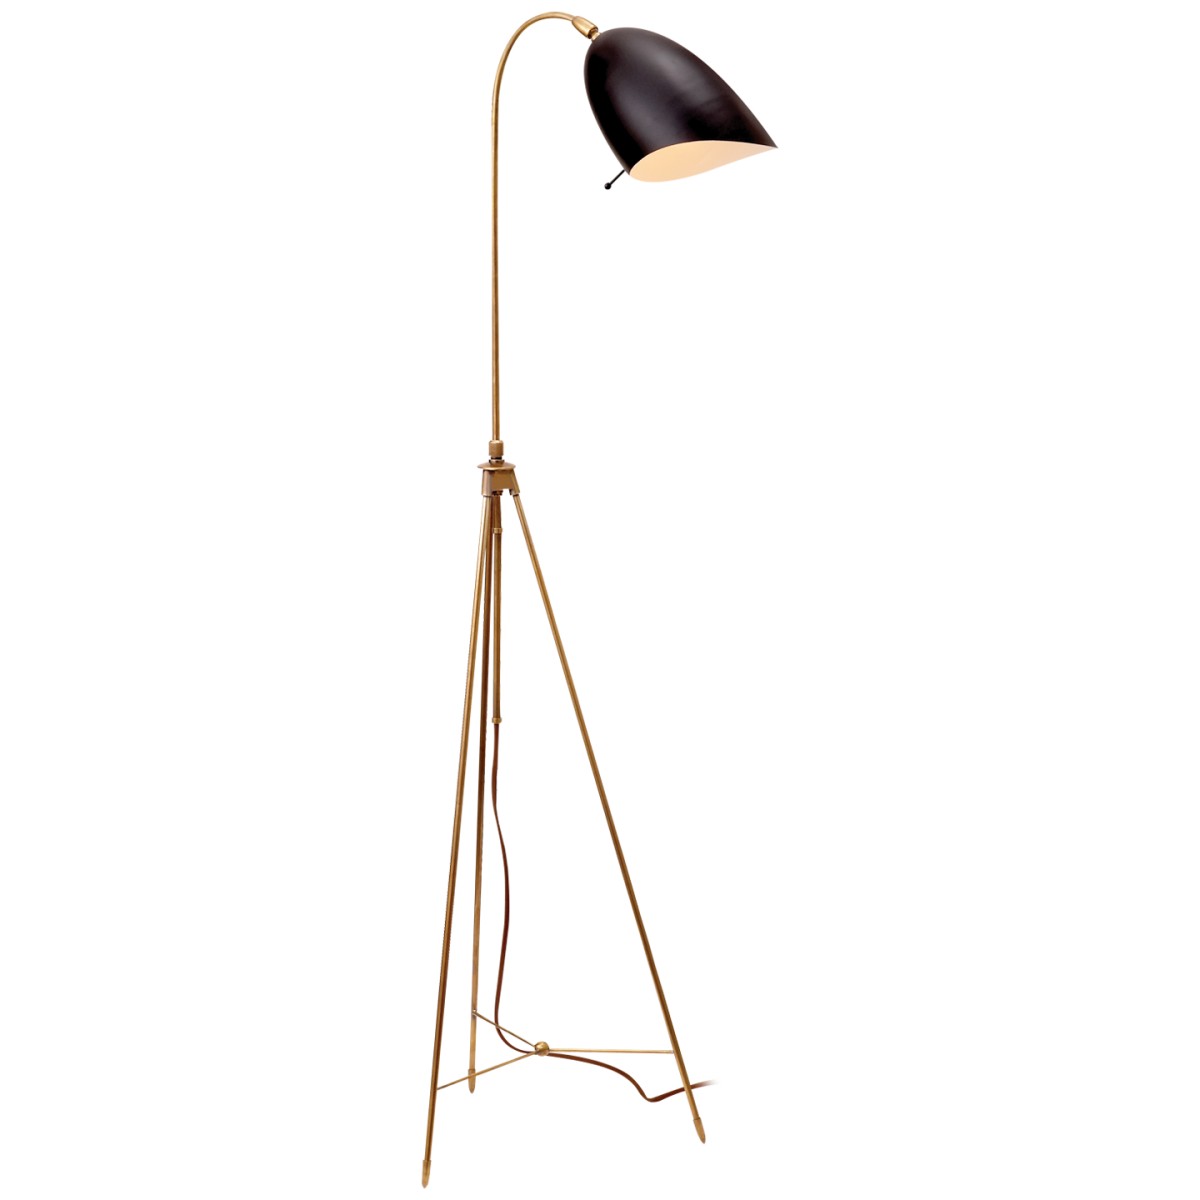 Sommerard Floor Lamp in Hand-Rubbed Antique Brass, Visual Comfort